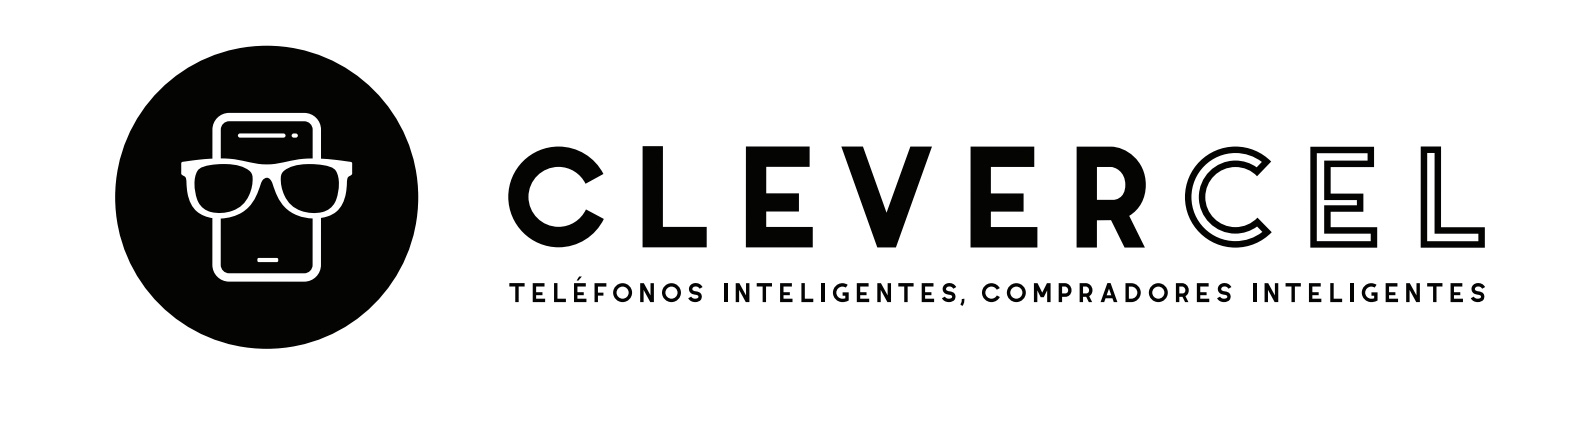 Clevercel 3